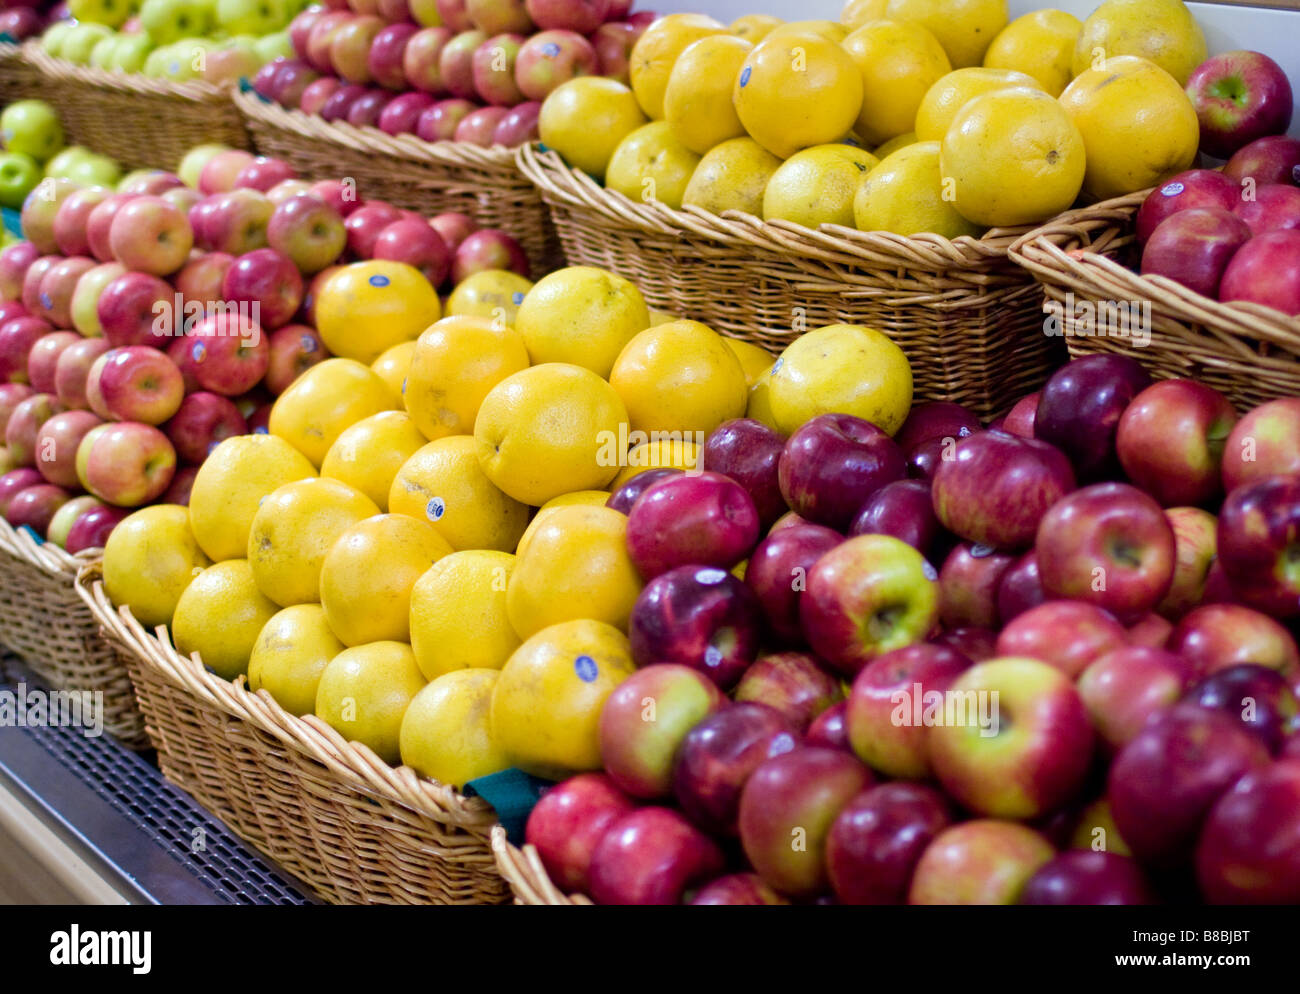 Fresh apples and grapefruits for sale in a supermarket produce department Stock Photo